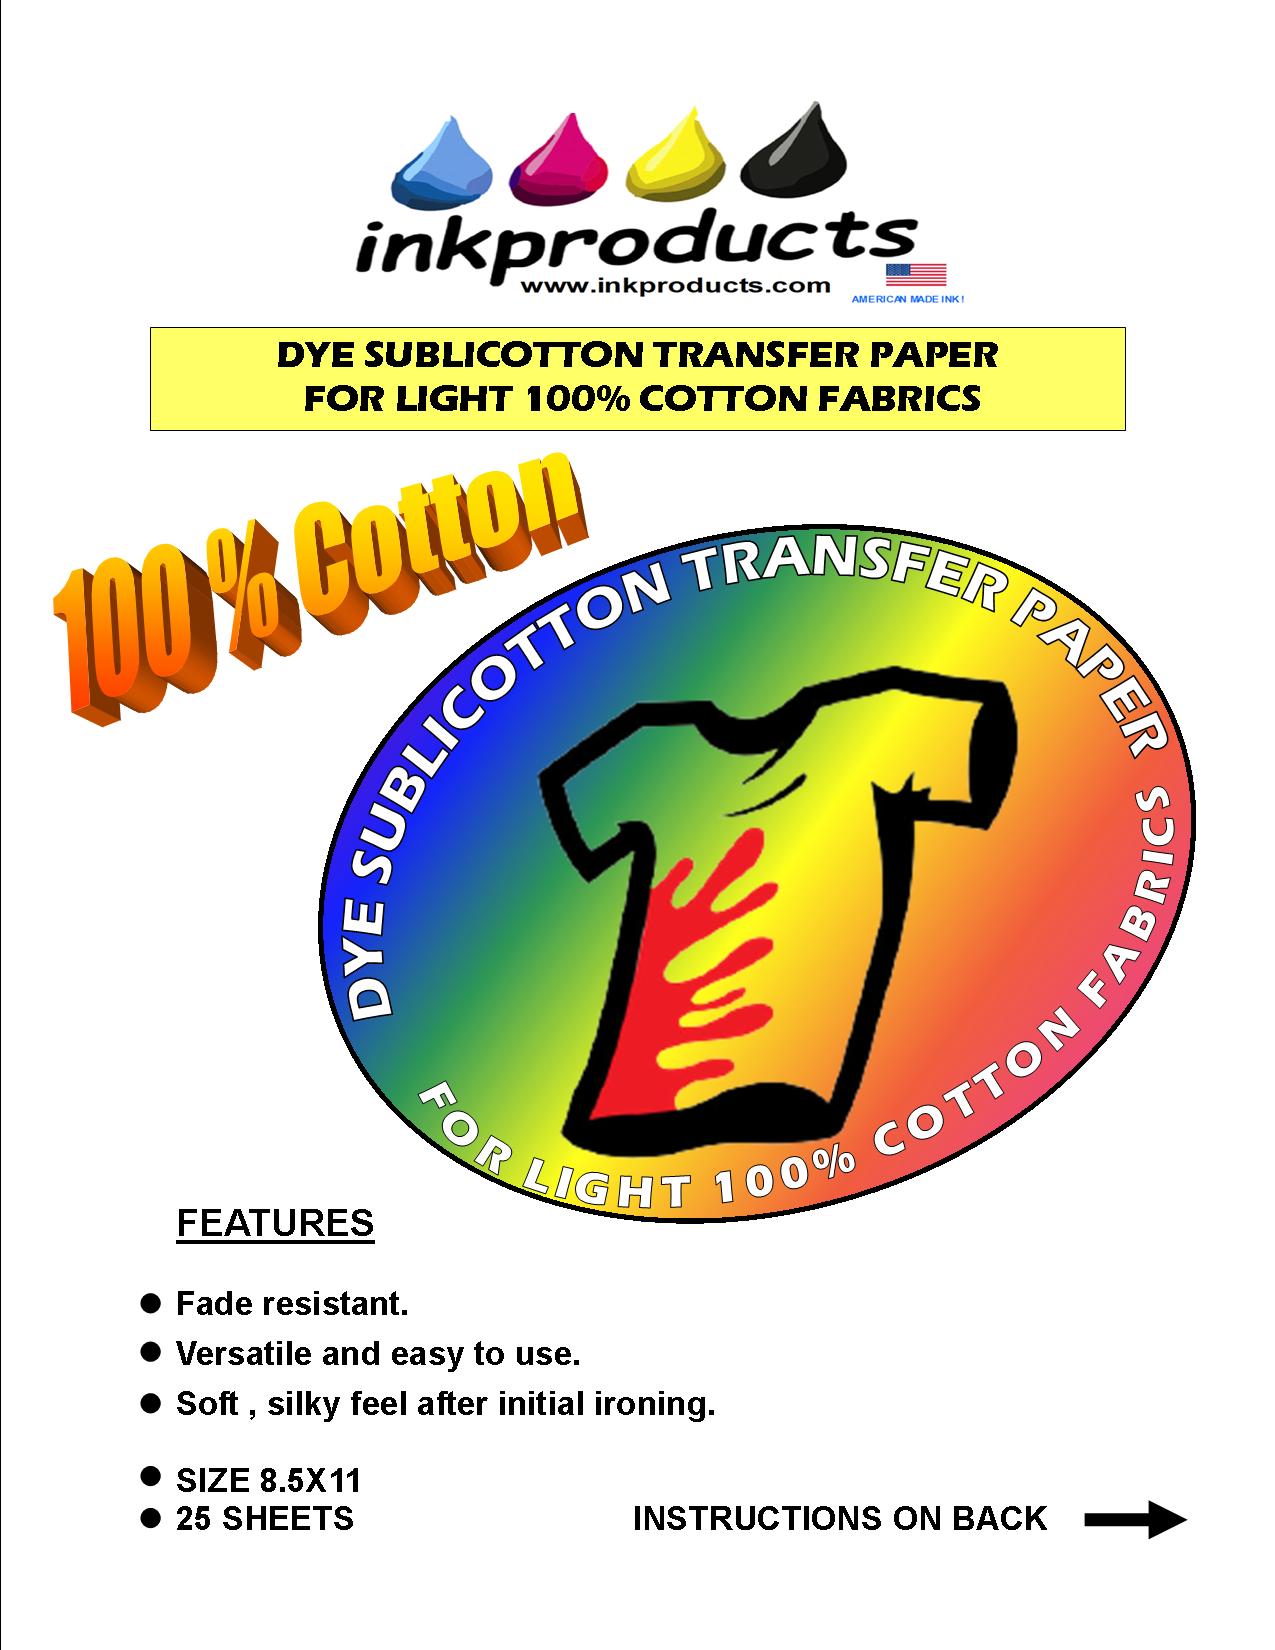 NEW!! Dye Sublicotton Transfer Paper For Light 100% Cotton Fabrics 25 Sheet Pack (CLONE)